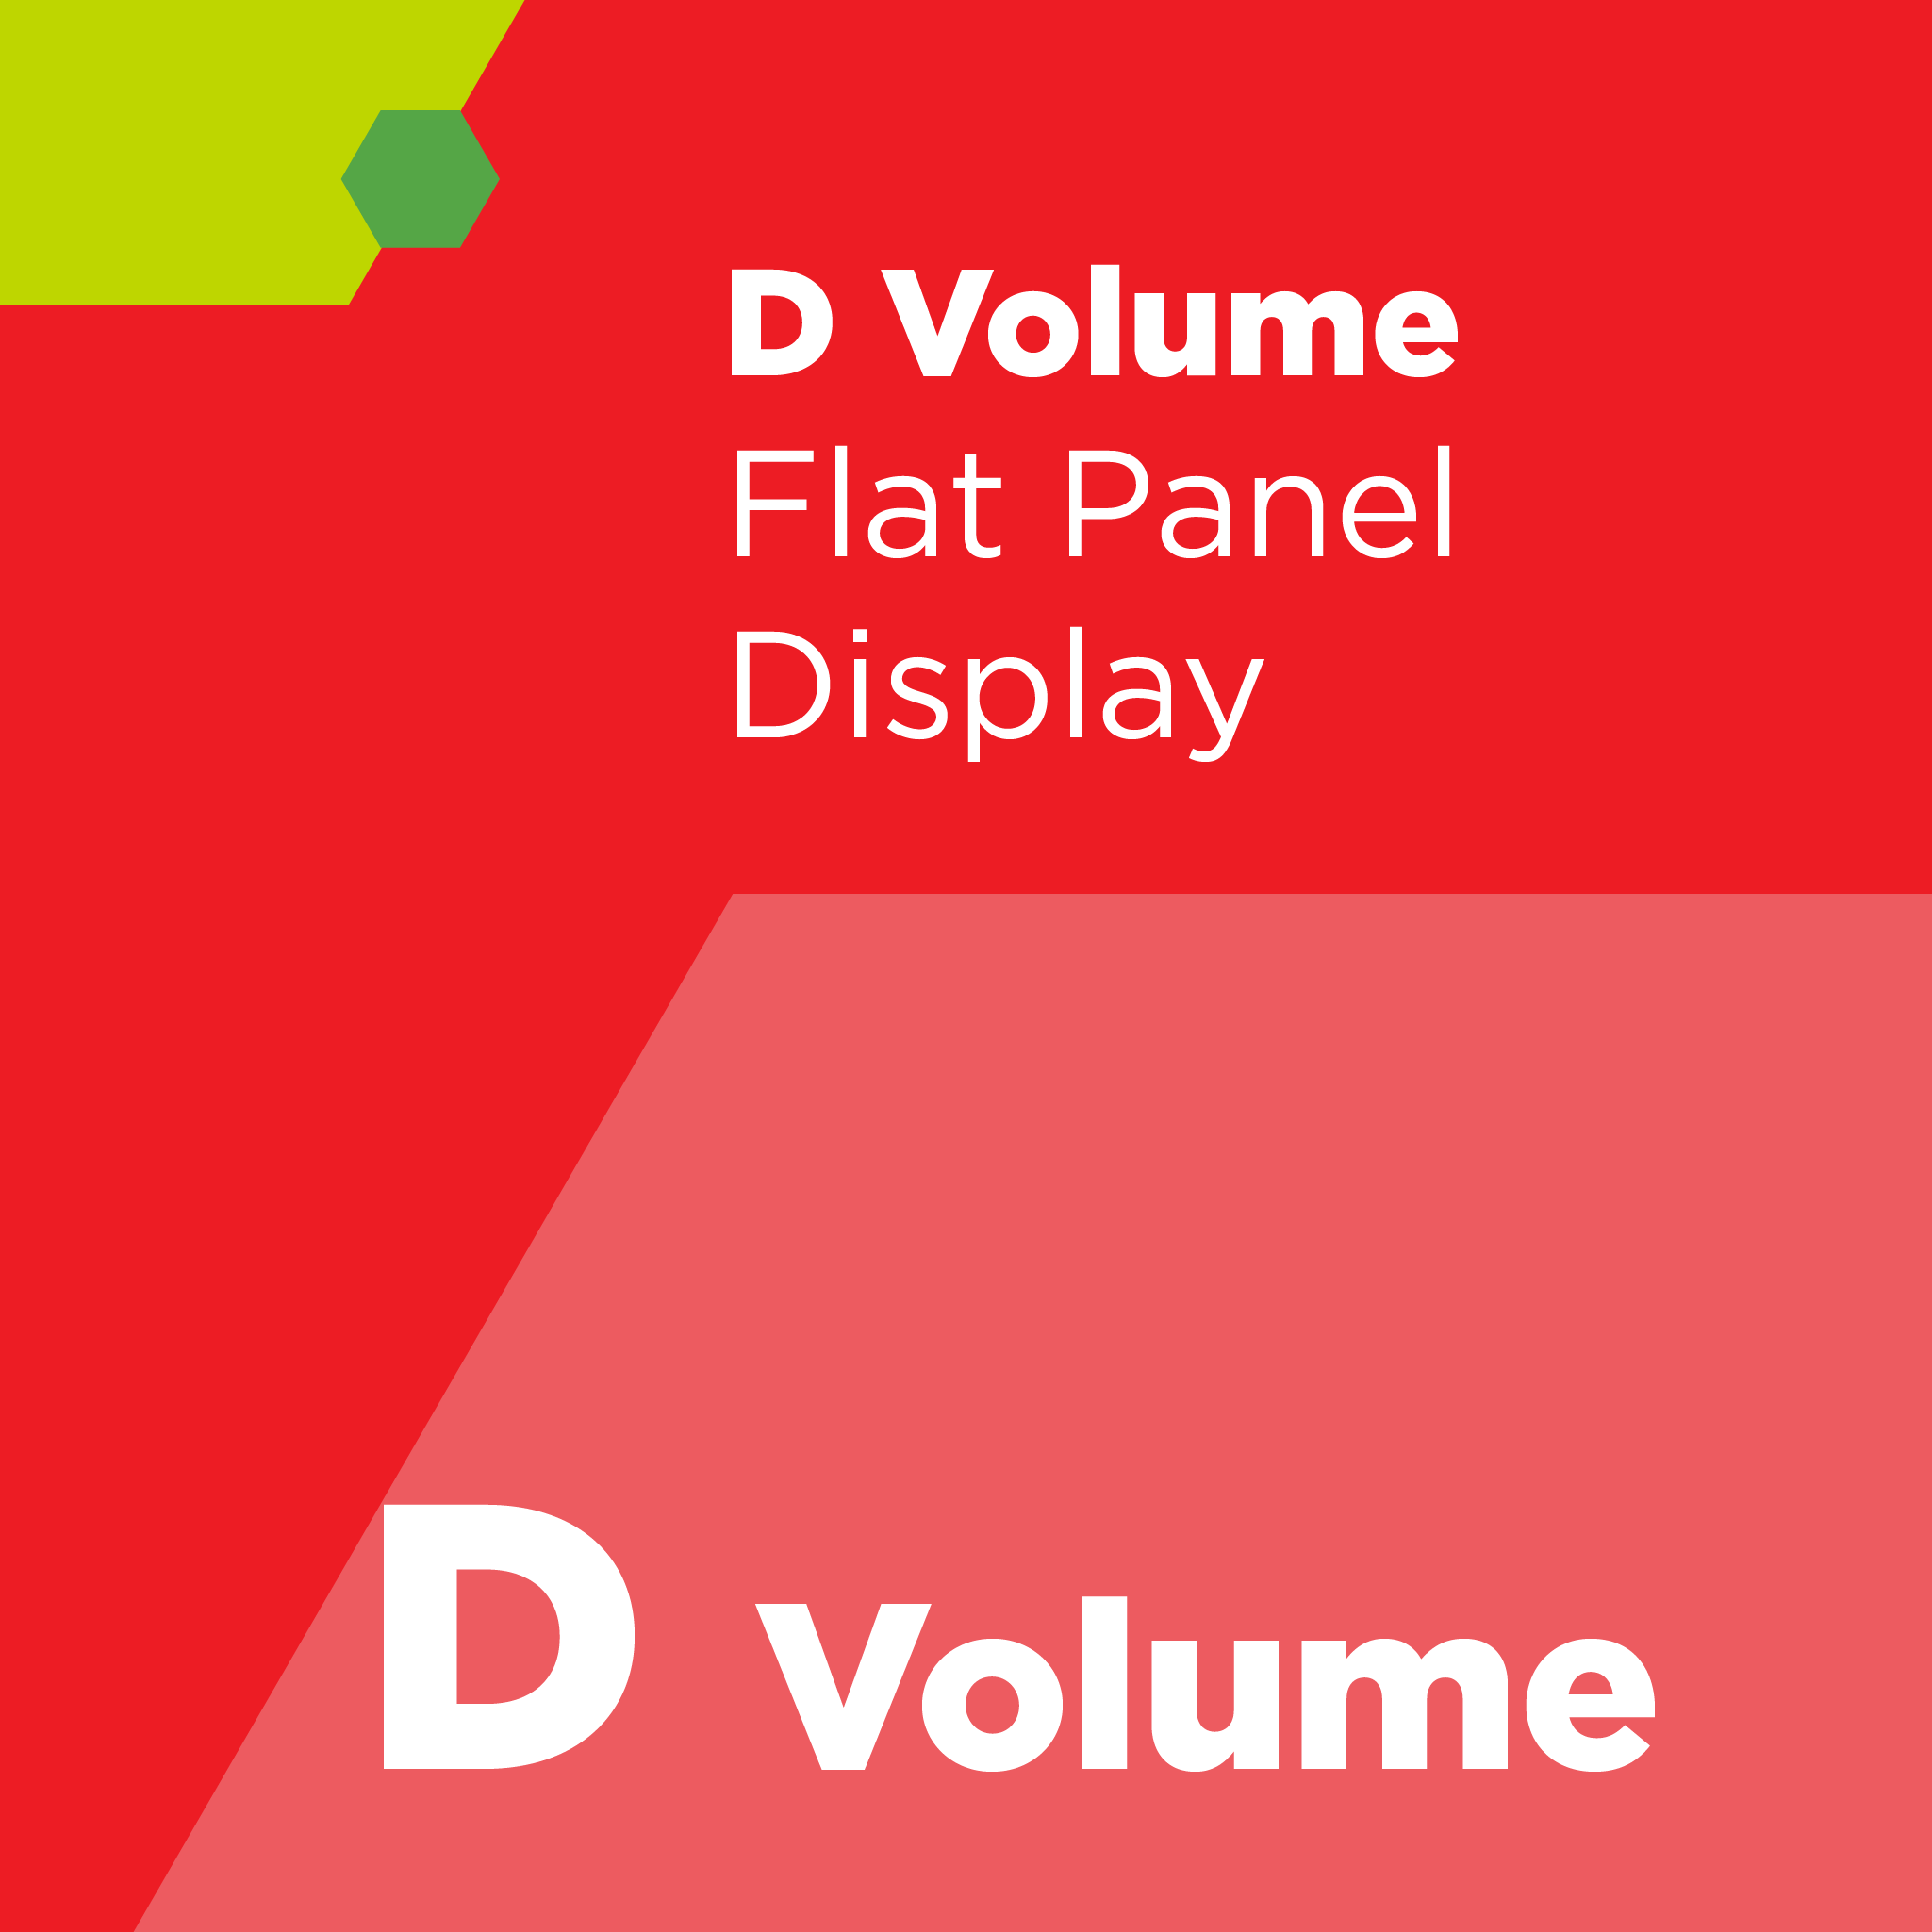 D00500 - SEMI D5 - Standard Size for Flat Panel Display Substrates